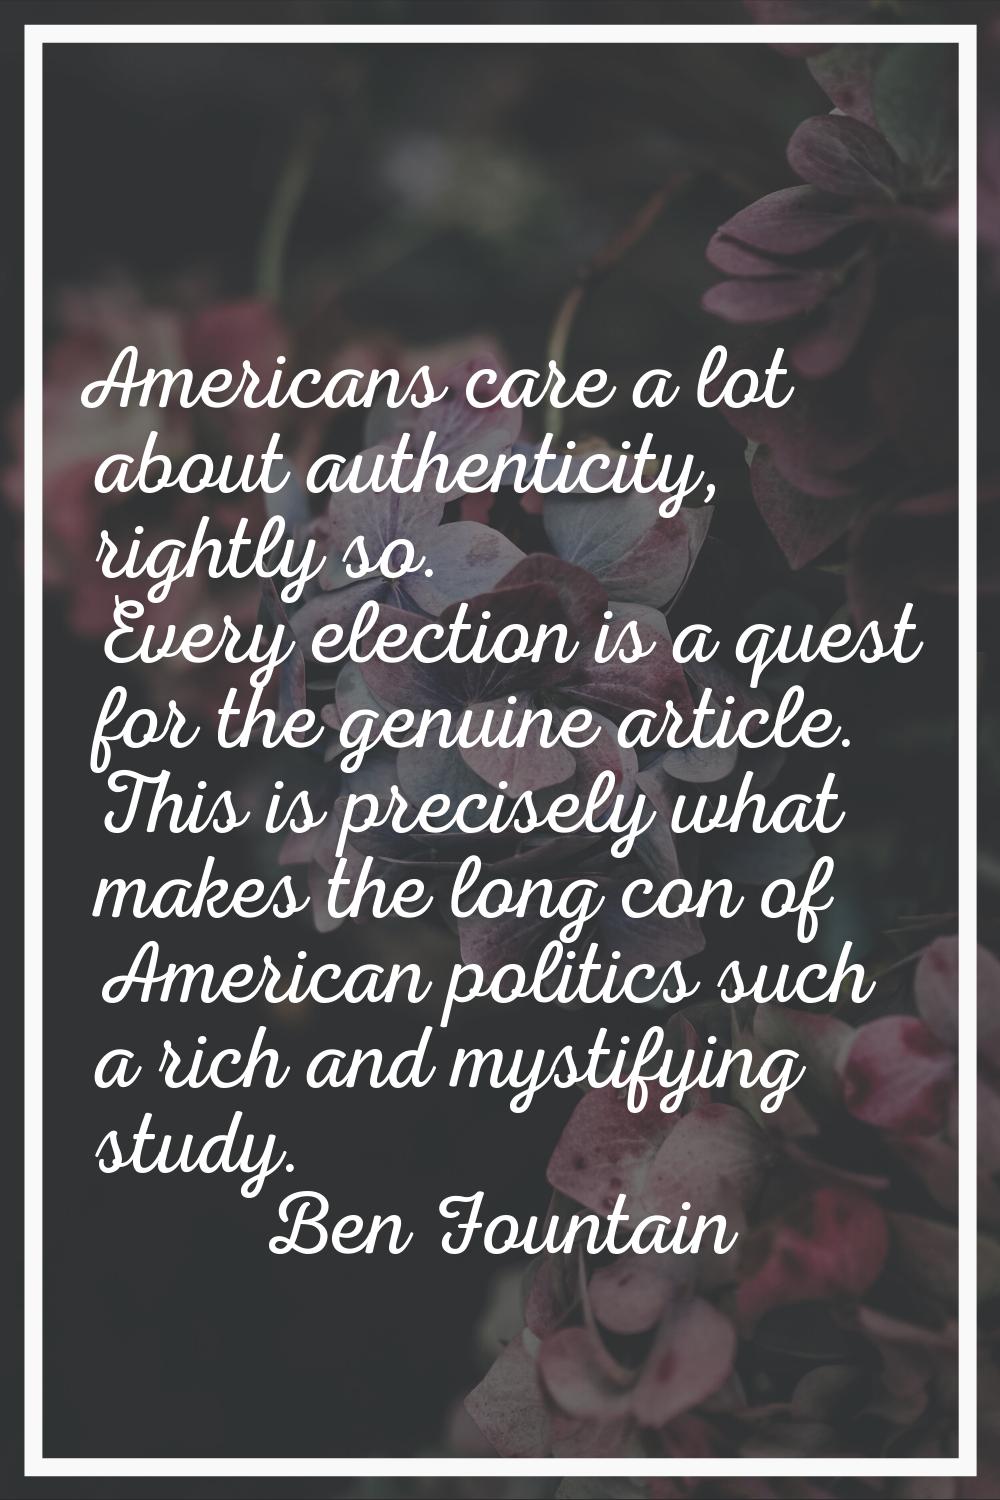 Americans care a lot about authenticity, rightly so. Every election is a quest for the genuine arti